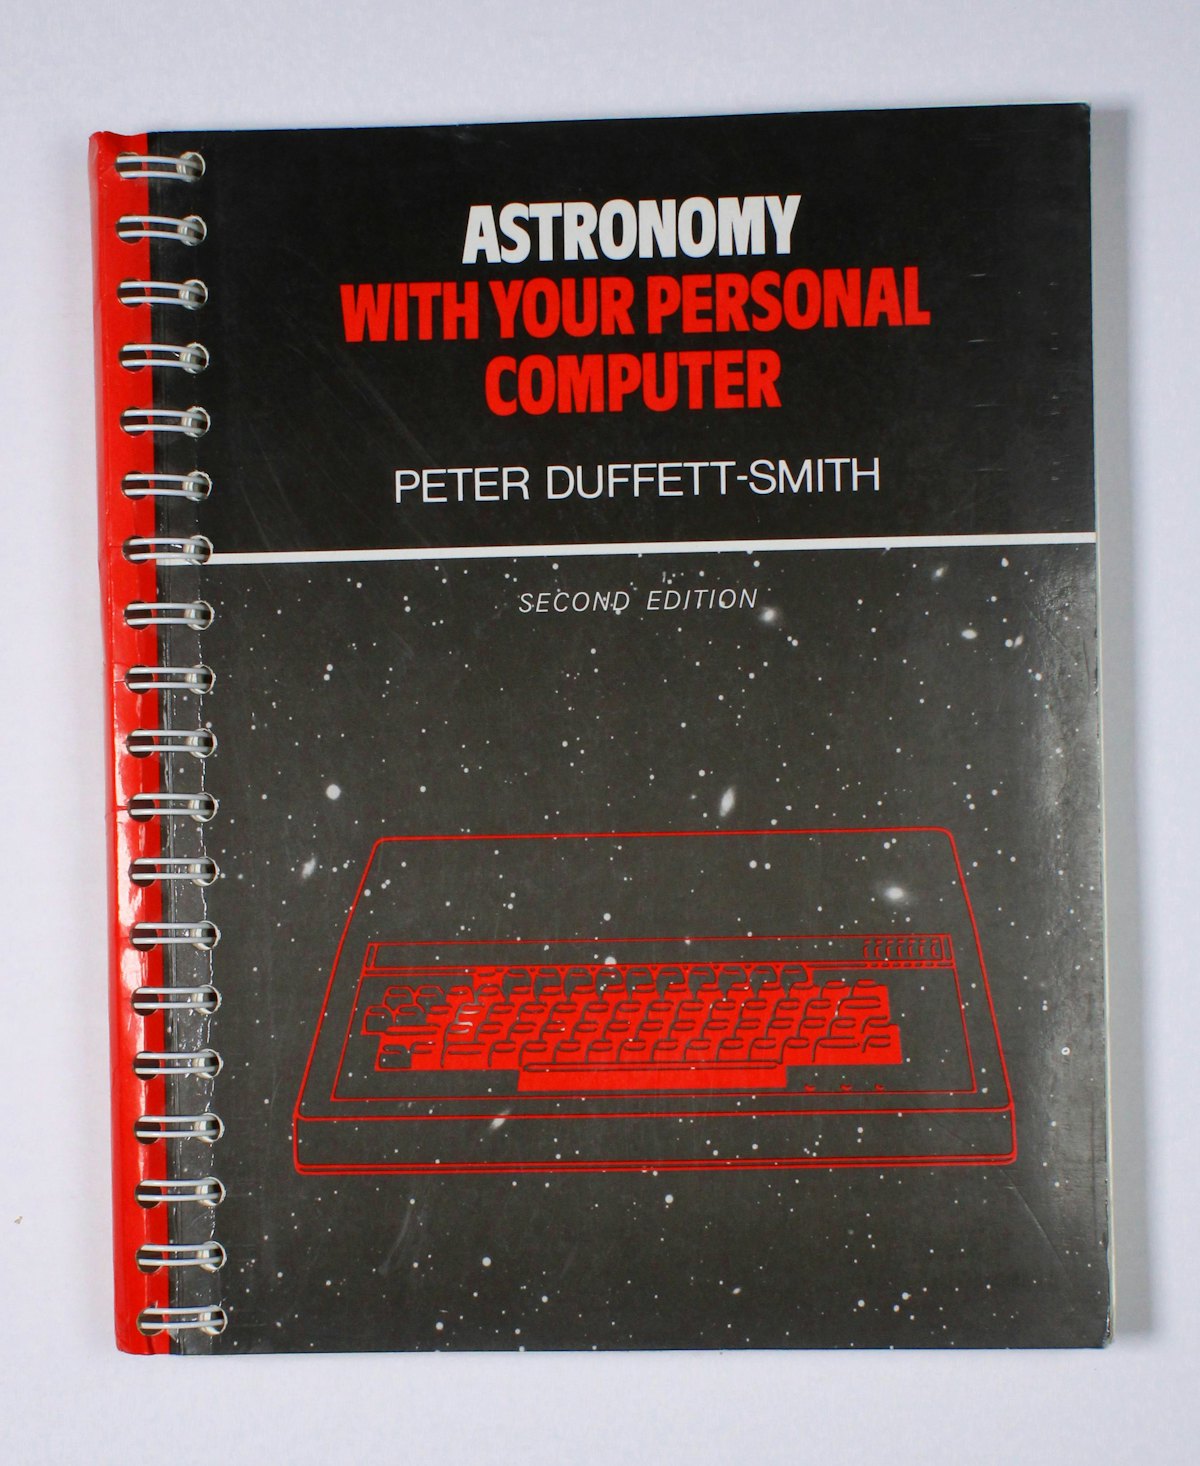 Astronomy with your personal computer